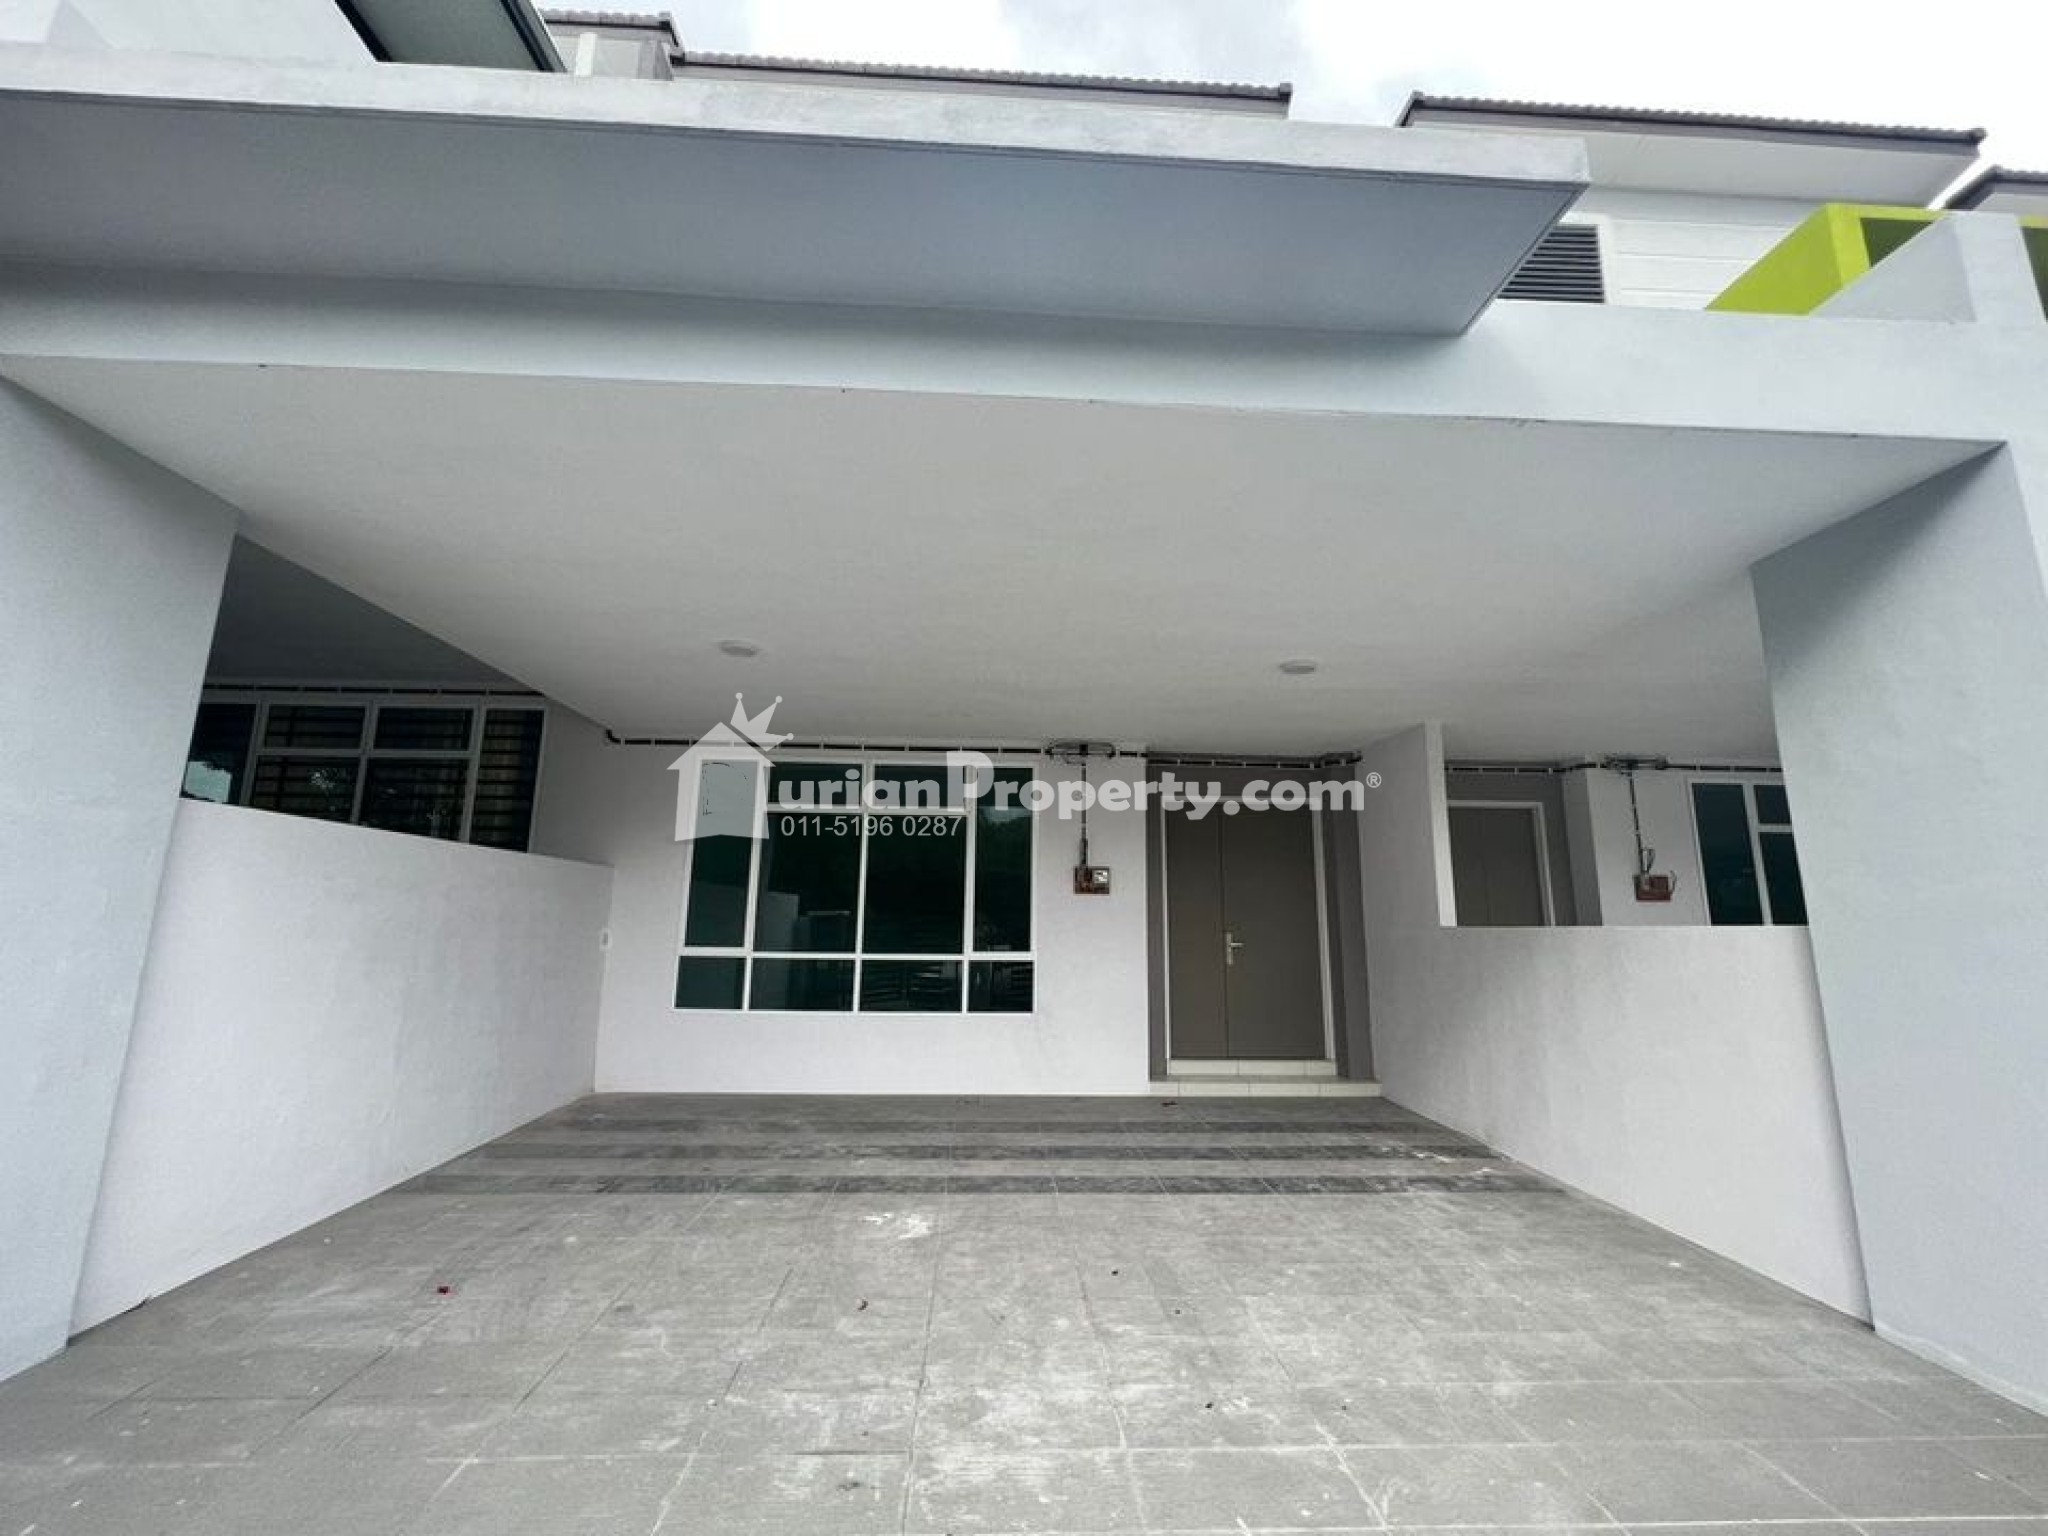 Terrace House For Rent at Bandar Lahat Mines